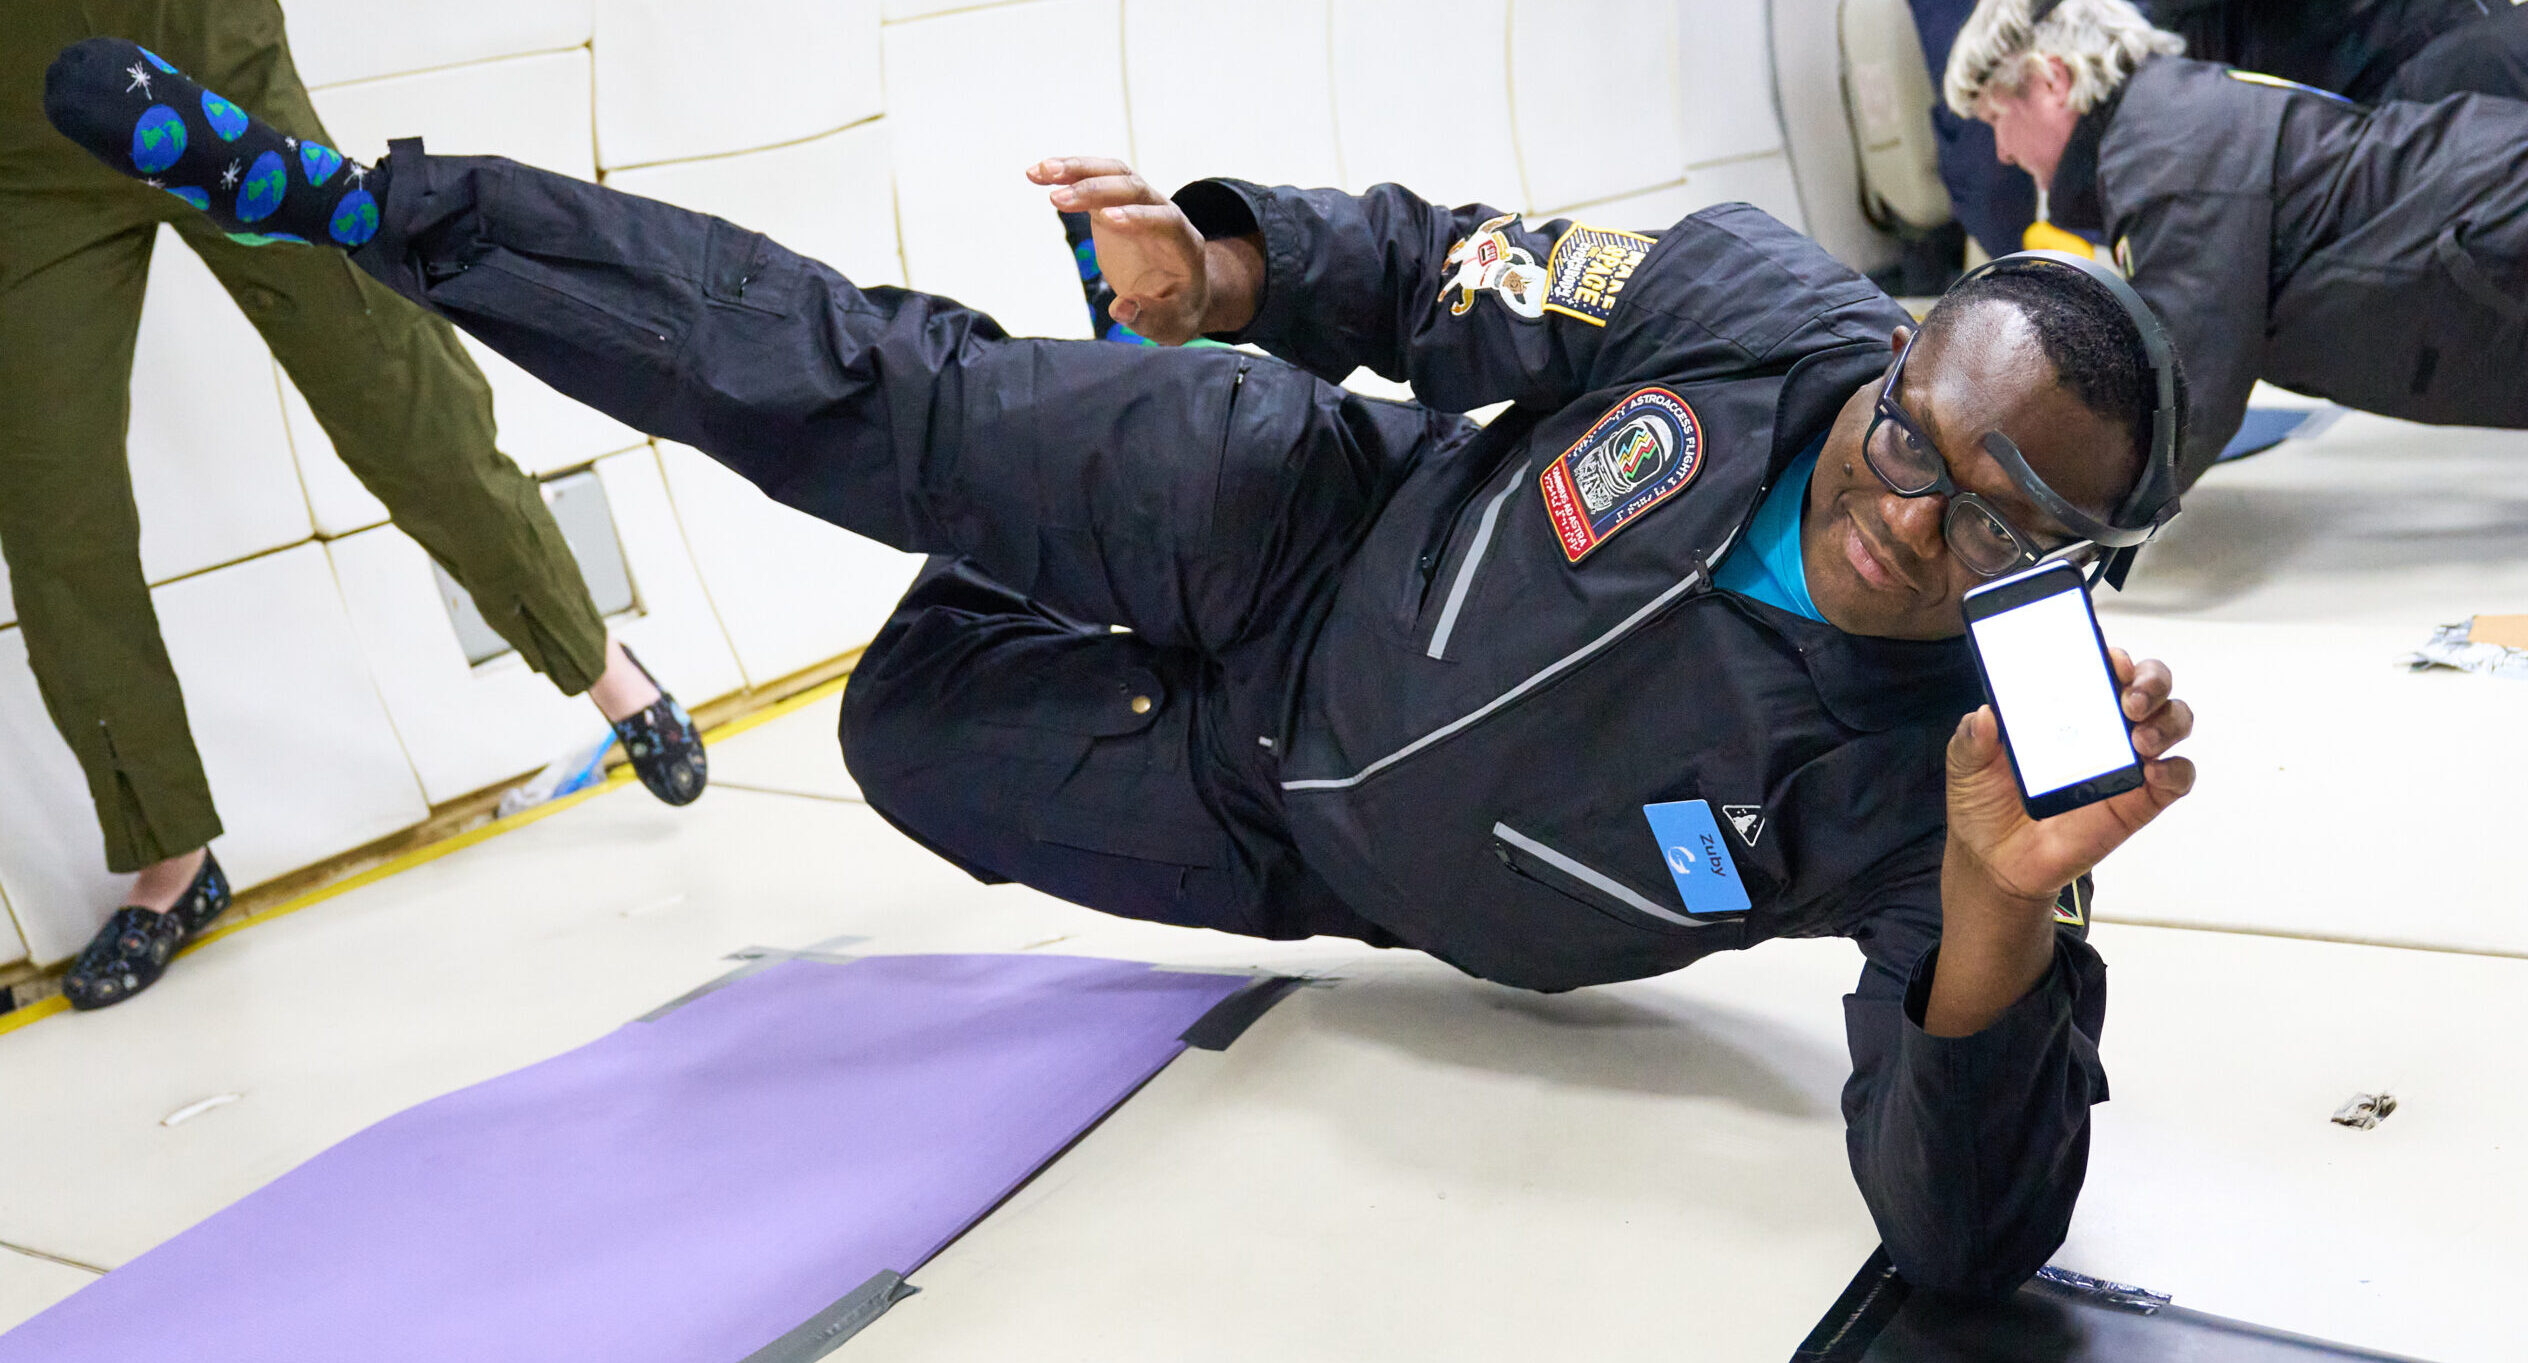 Zuby, a low vision ambassador, holds up his phone towards the camera as he floats in zero gravity, displaying a test for his heads-up display technology prototype.